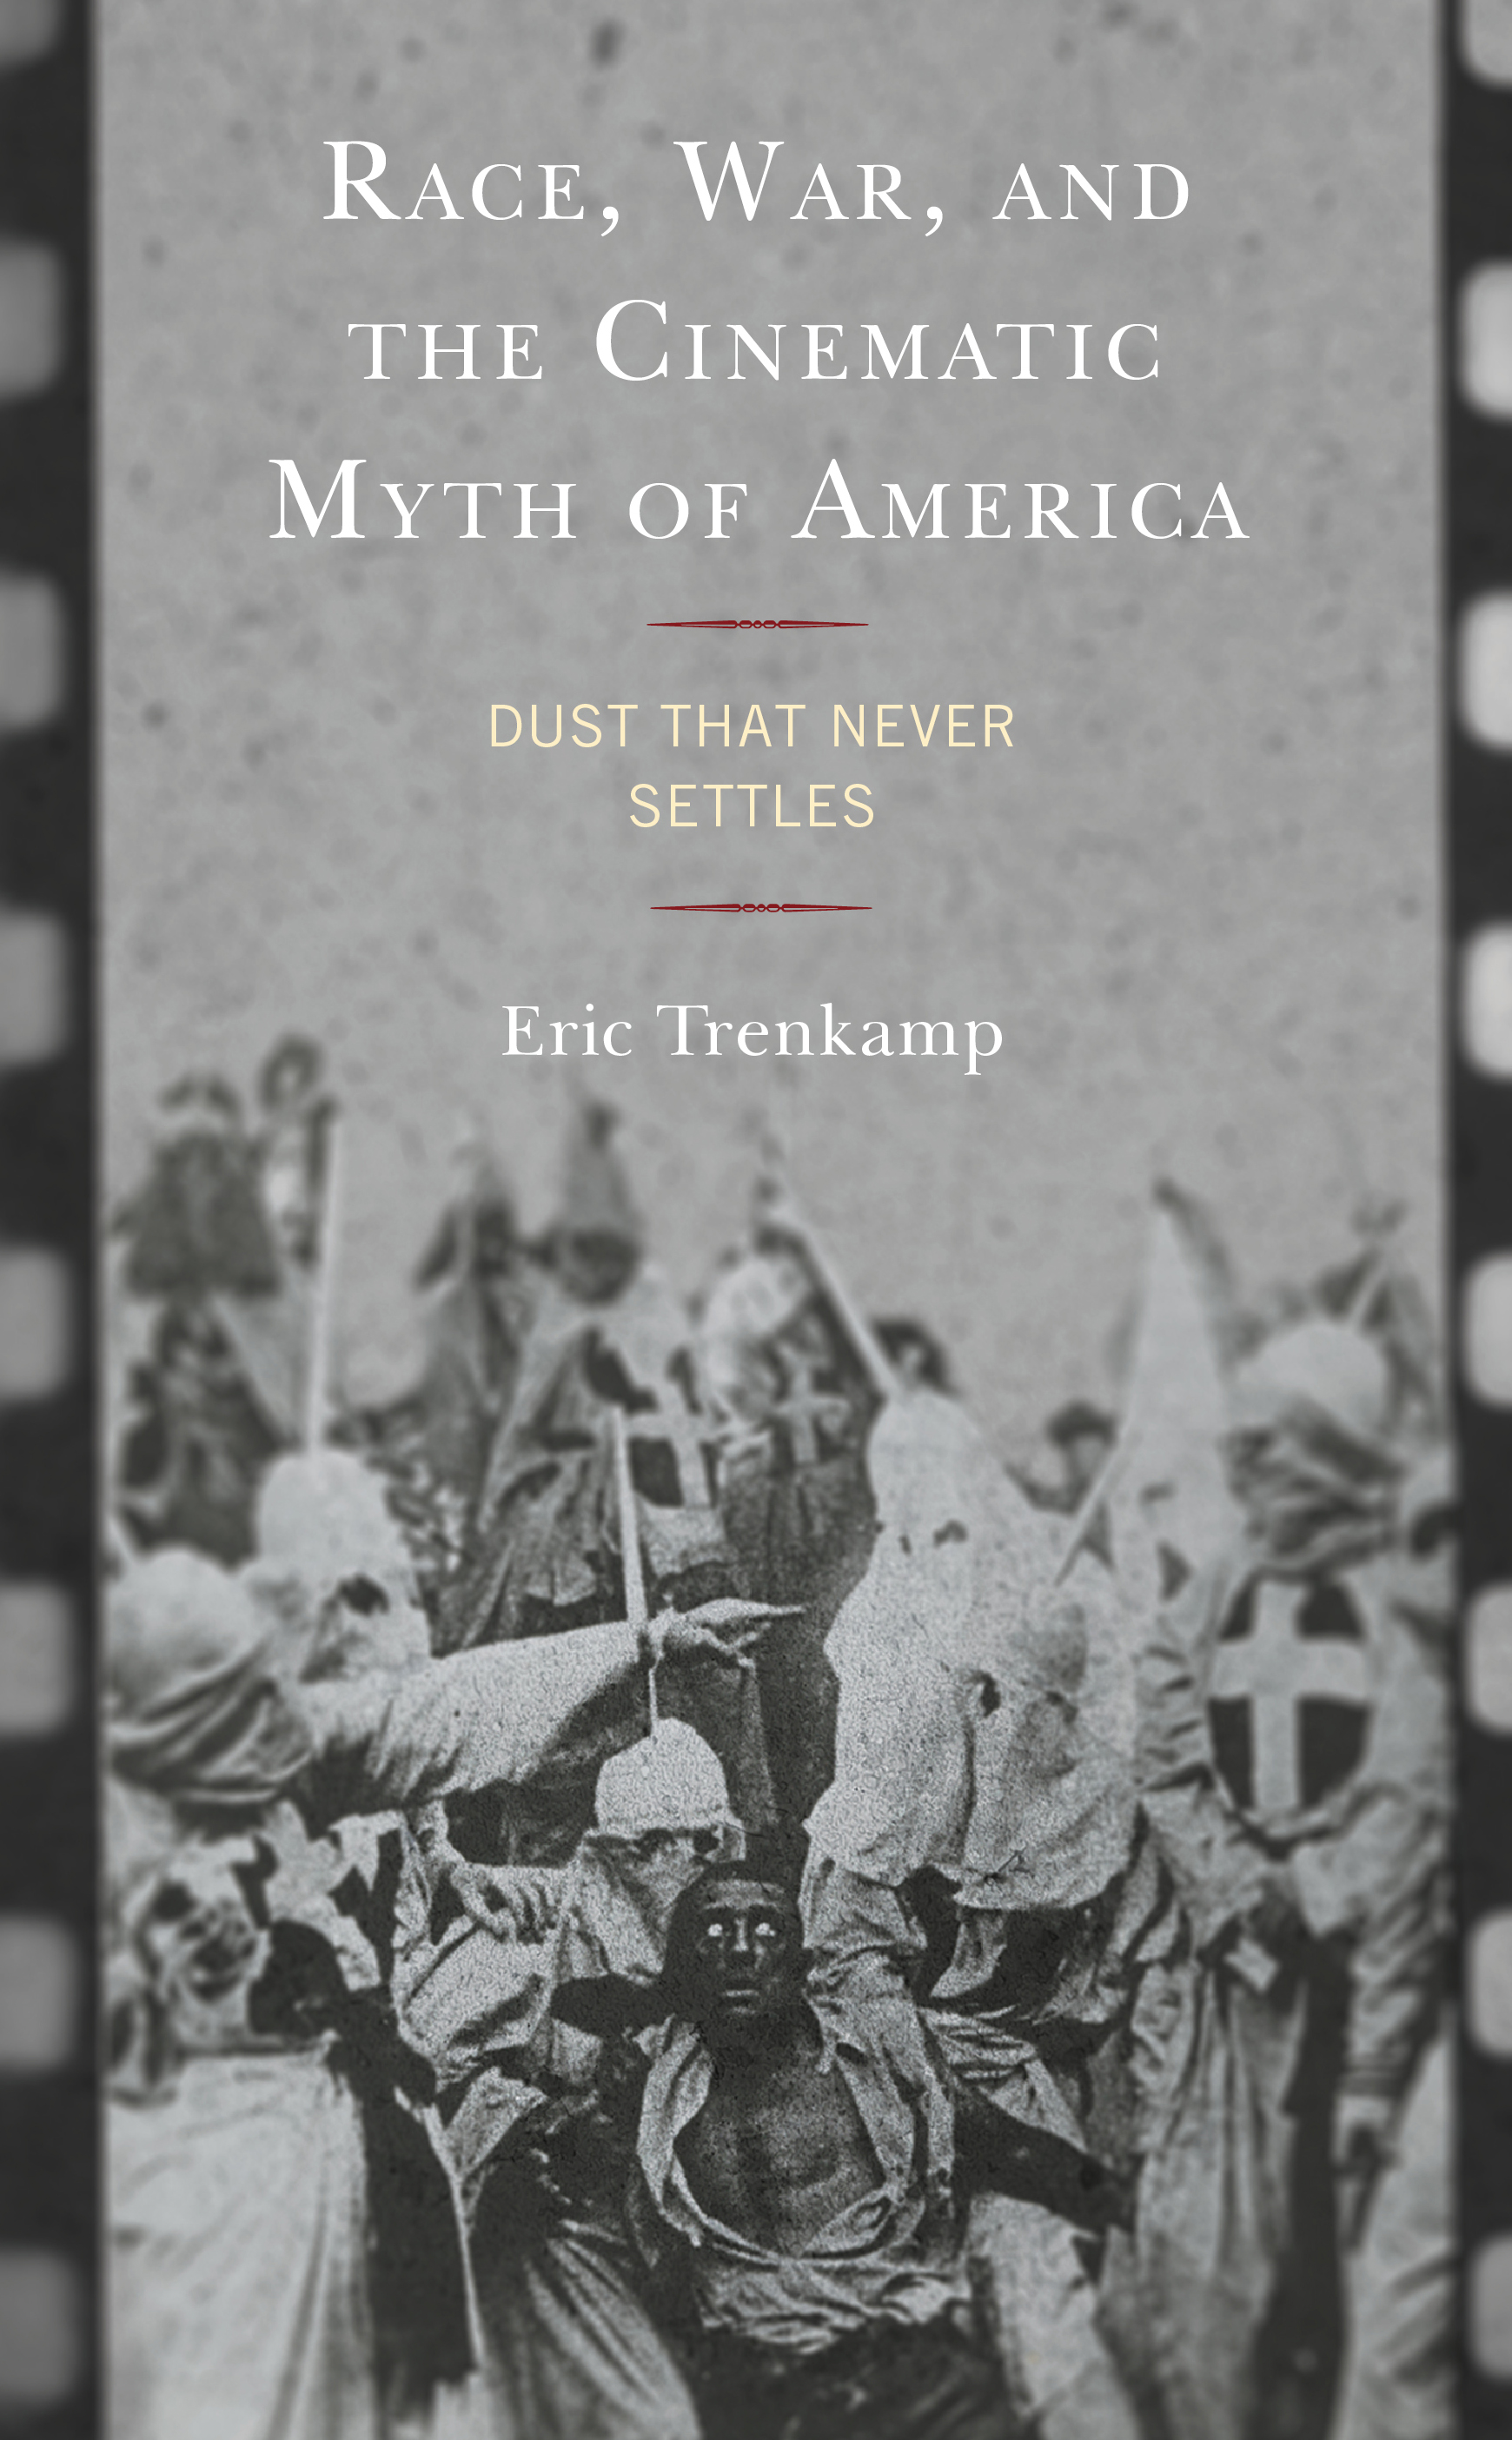 Race, War, and the Cinematic Myth of America: Dust That Never Settles